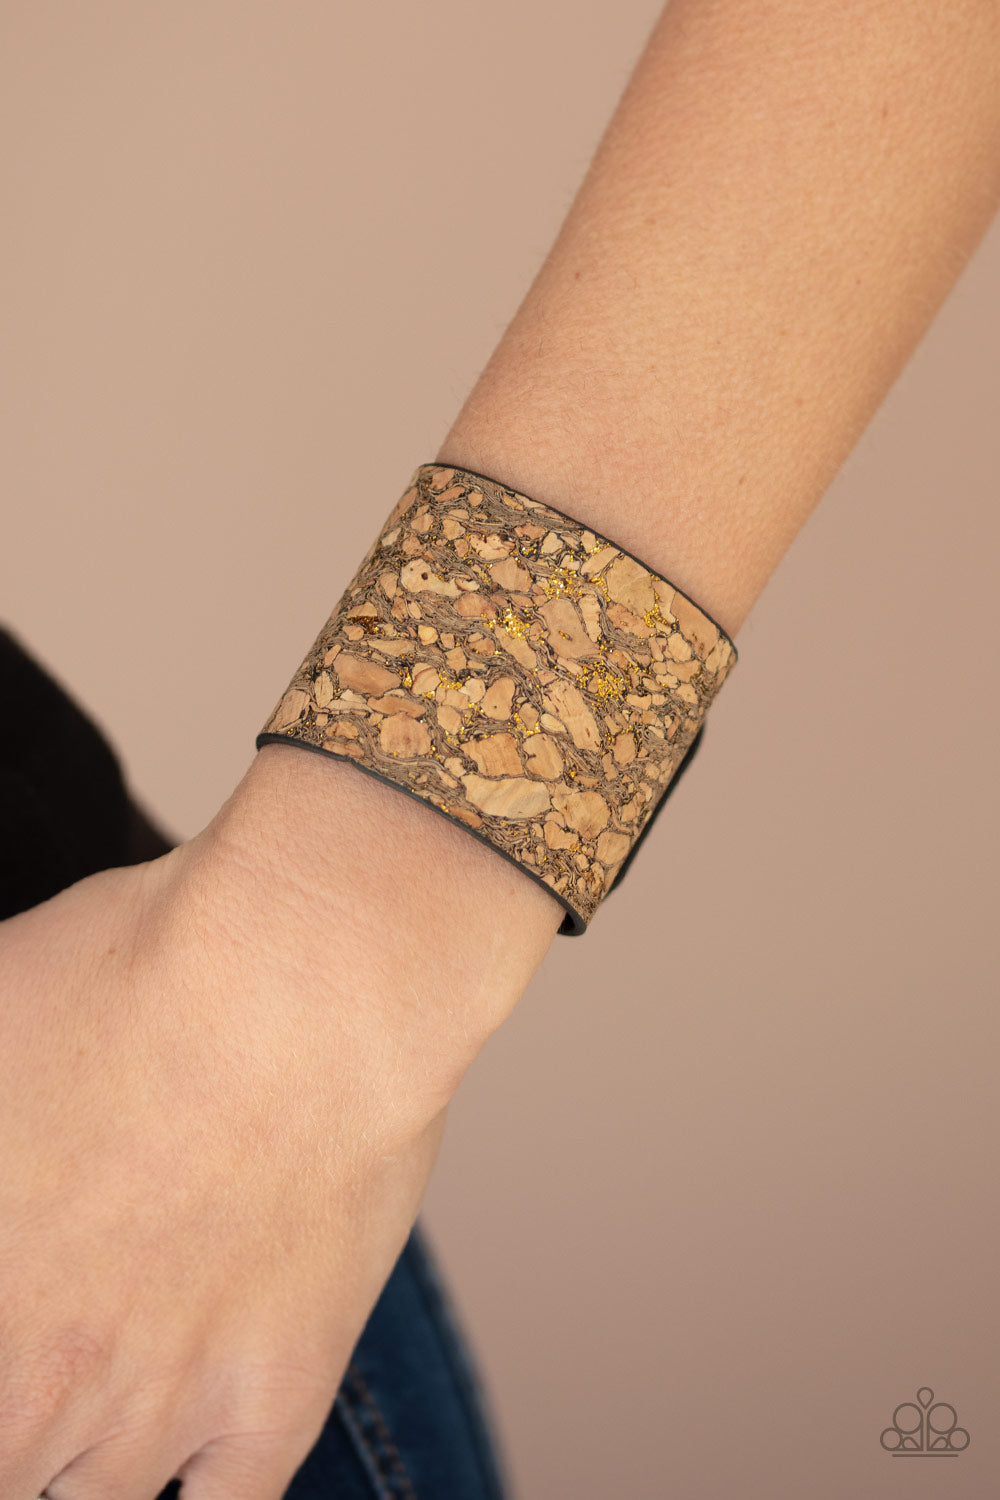 Cork Congo - Brass Snap Closure Bracelet - Paparazzi Accessories - Pieces of cork have been plastered across the front of a black leather band, creating an earthy look around the wrist. Specks of glittery brass accents are sprinkled across the front for a flashy finish. Adjustable snap closure fashion bracelet.